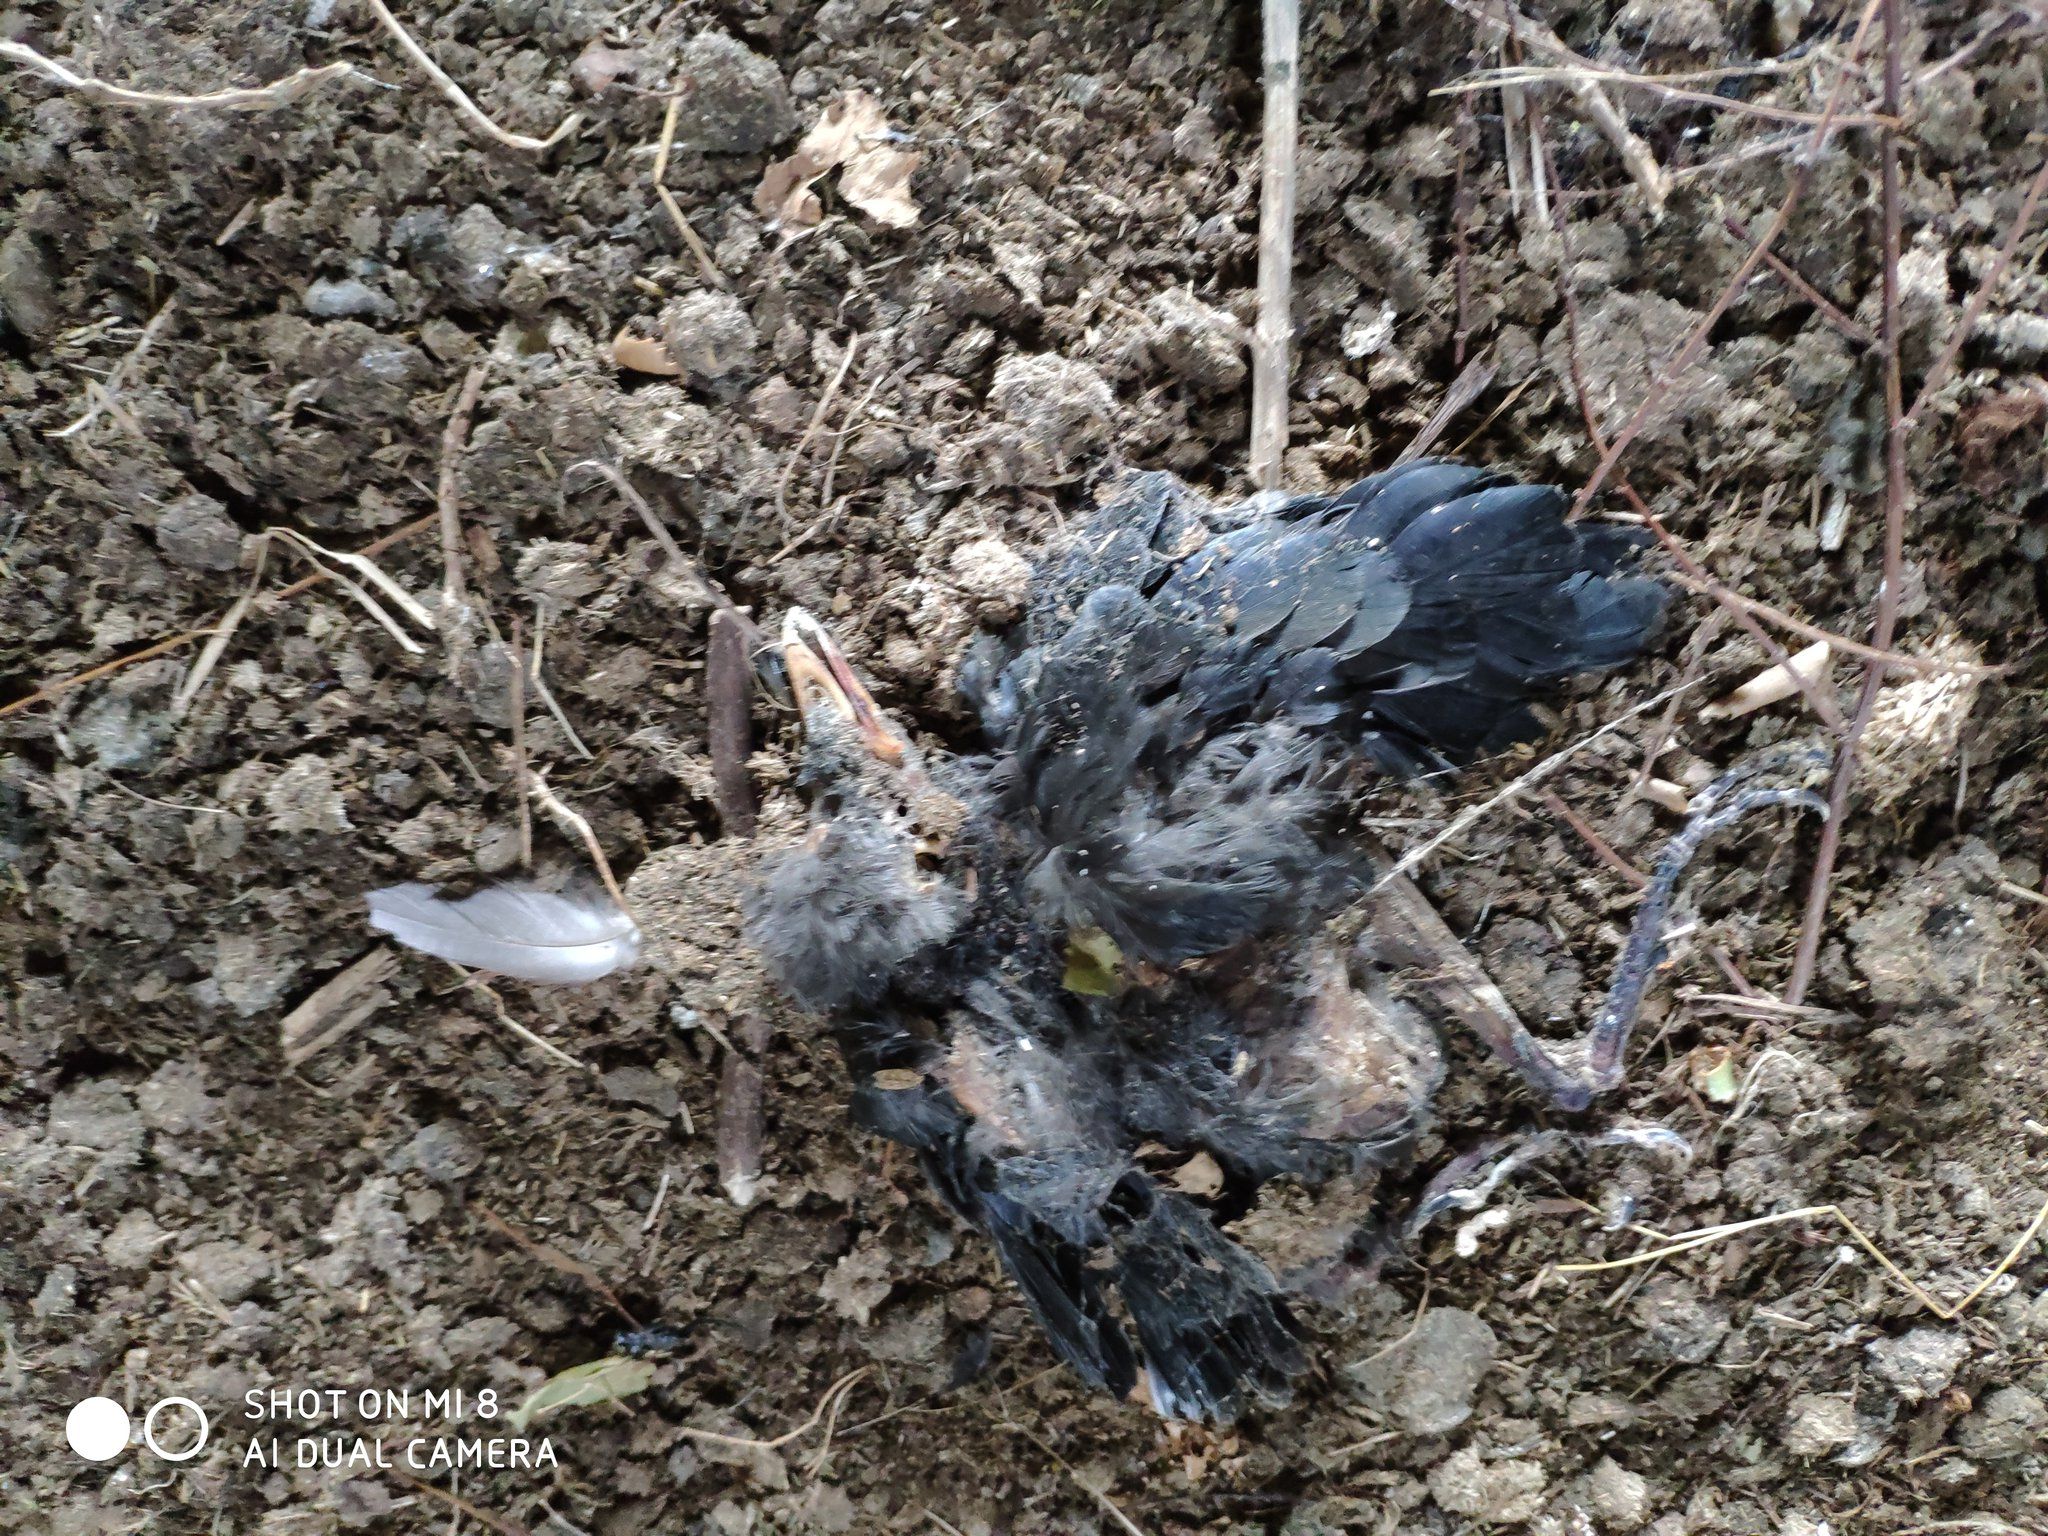 SHOCKING: The dead jackdaw chicks beside the wrecked nest